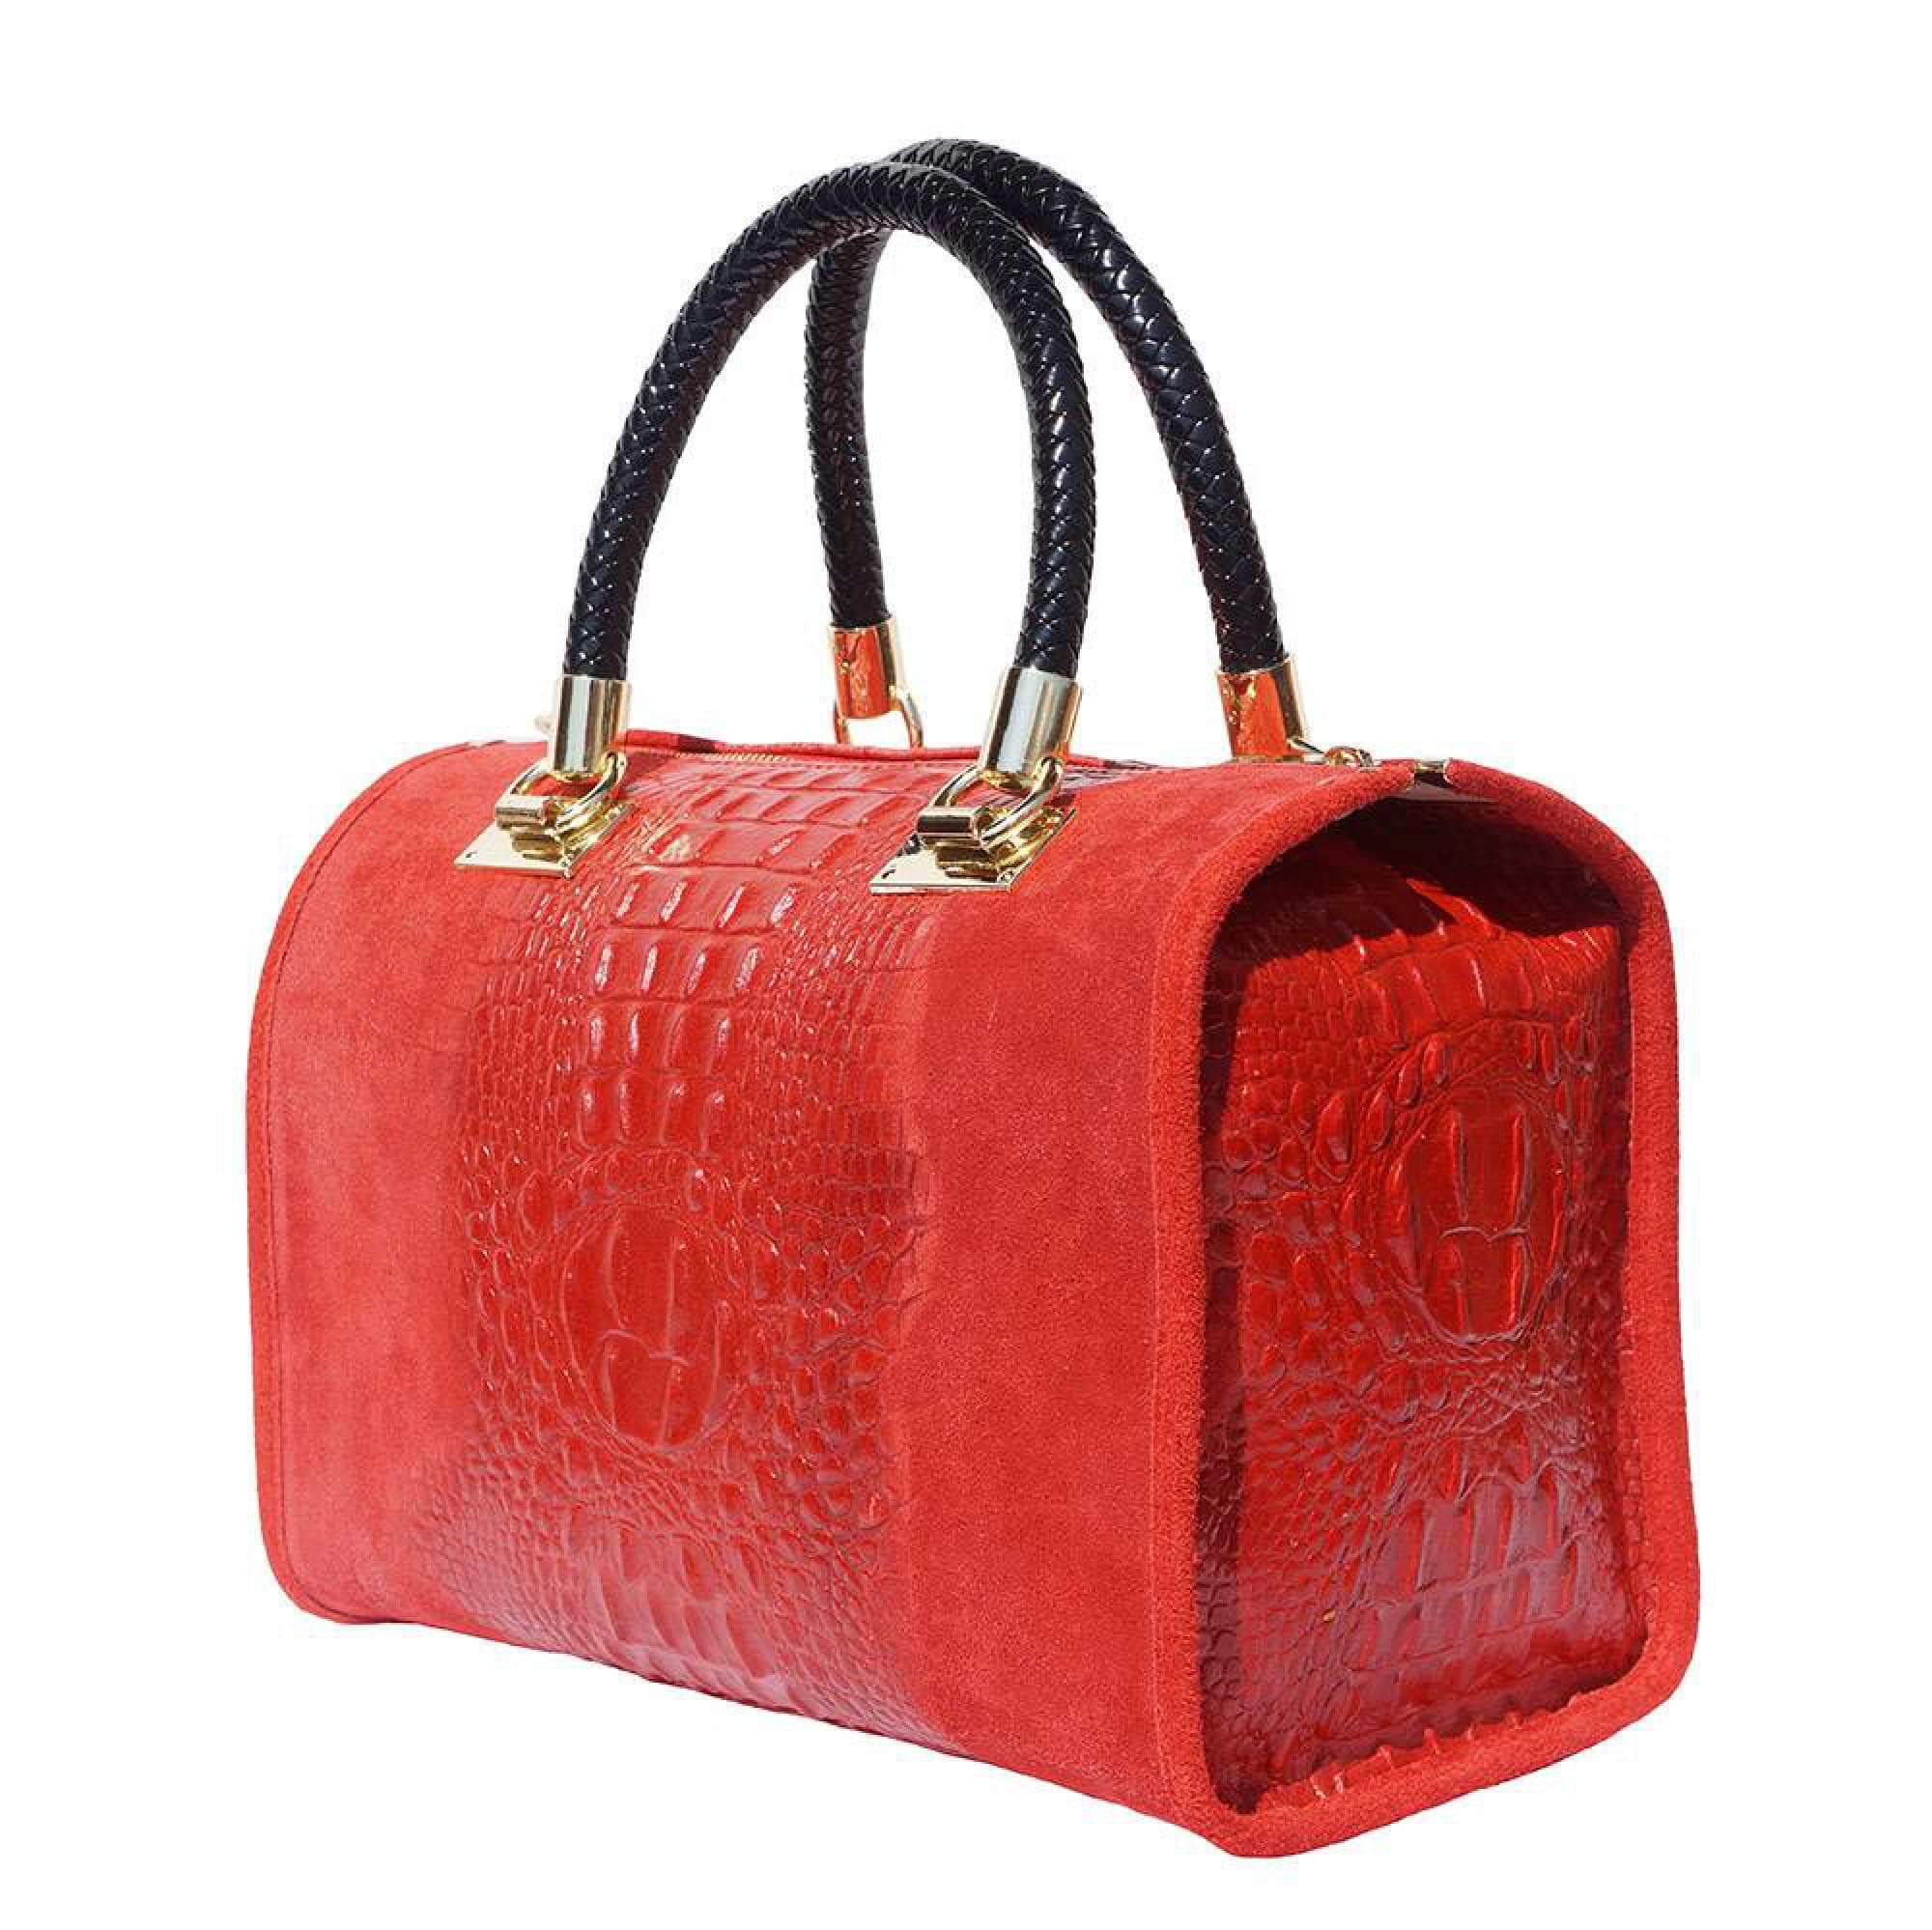 Italian private label of leather handbags made in Italy, manufacturers and brands